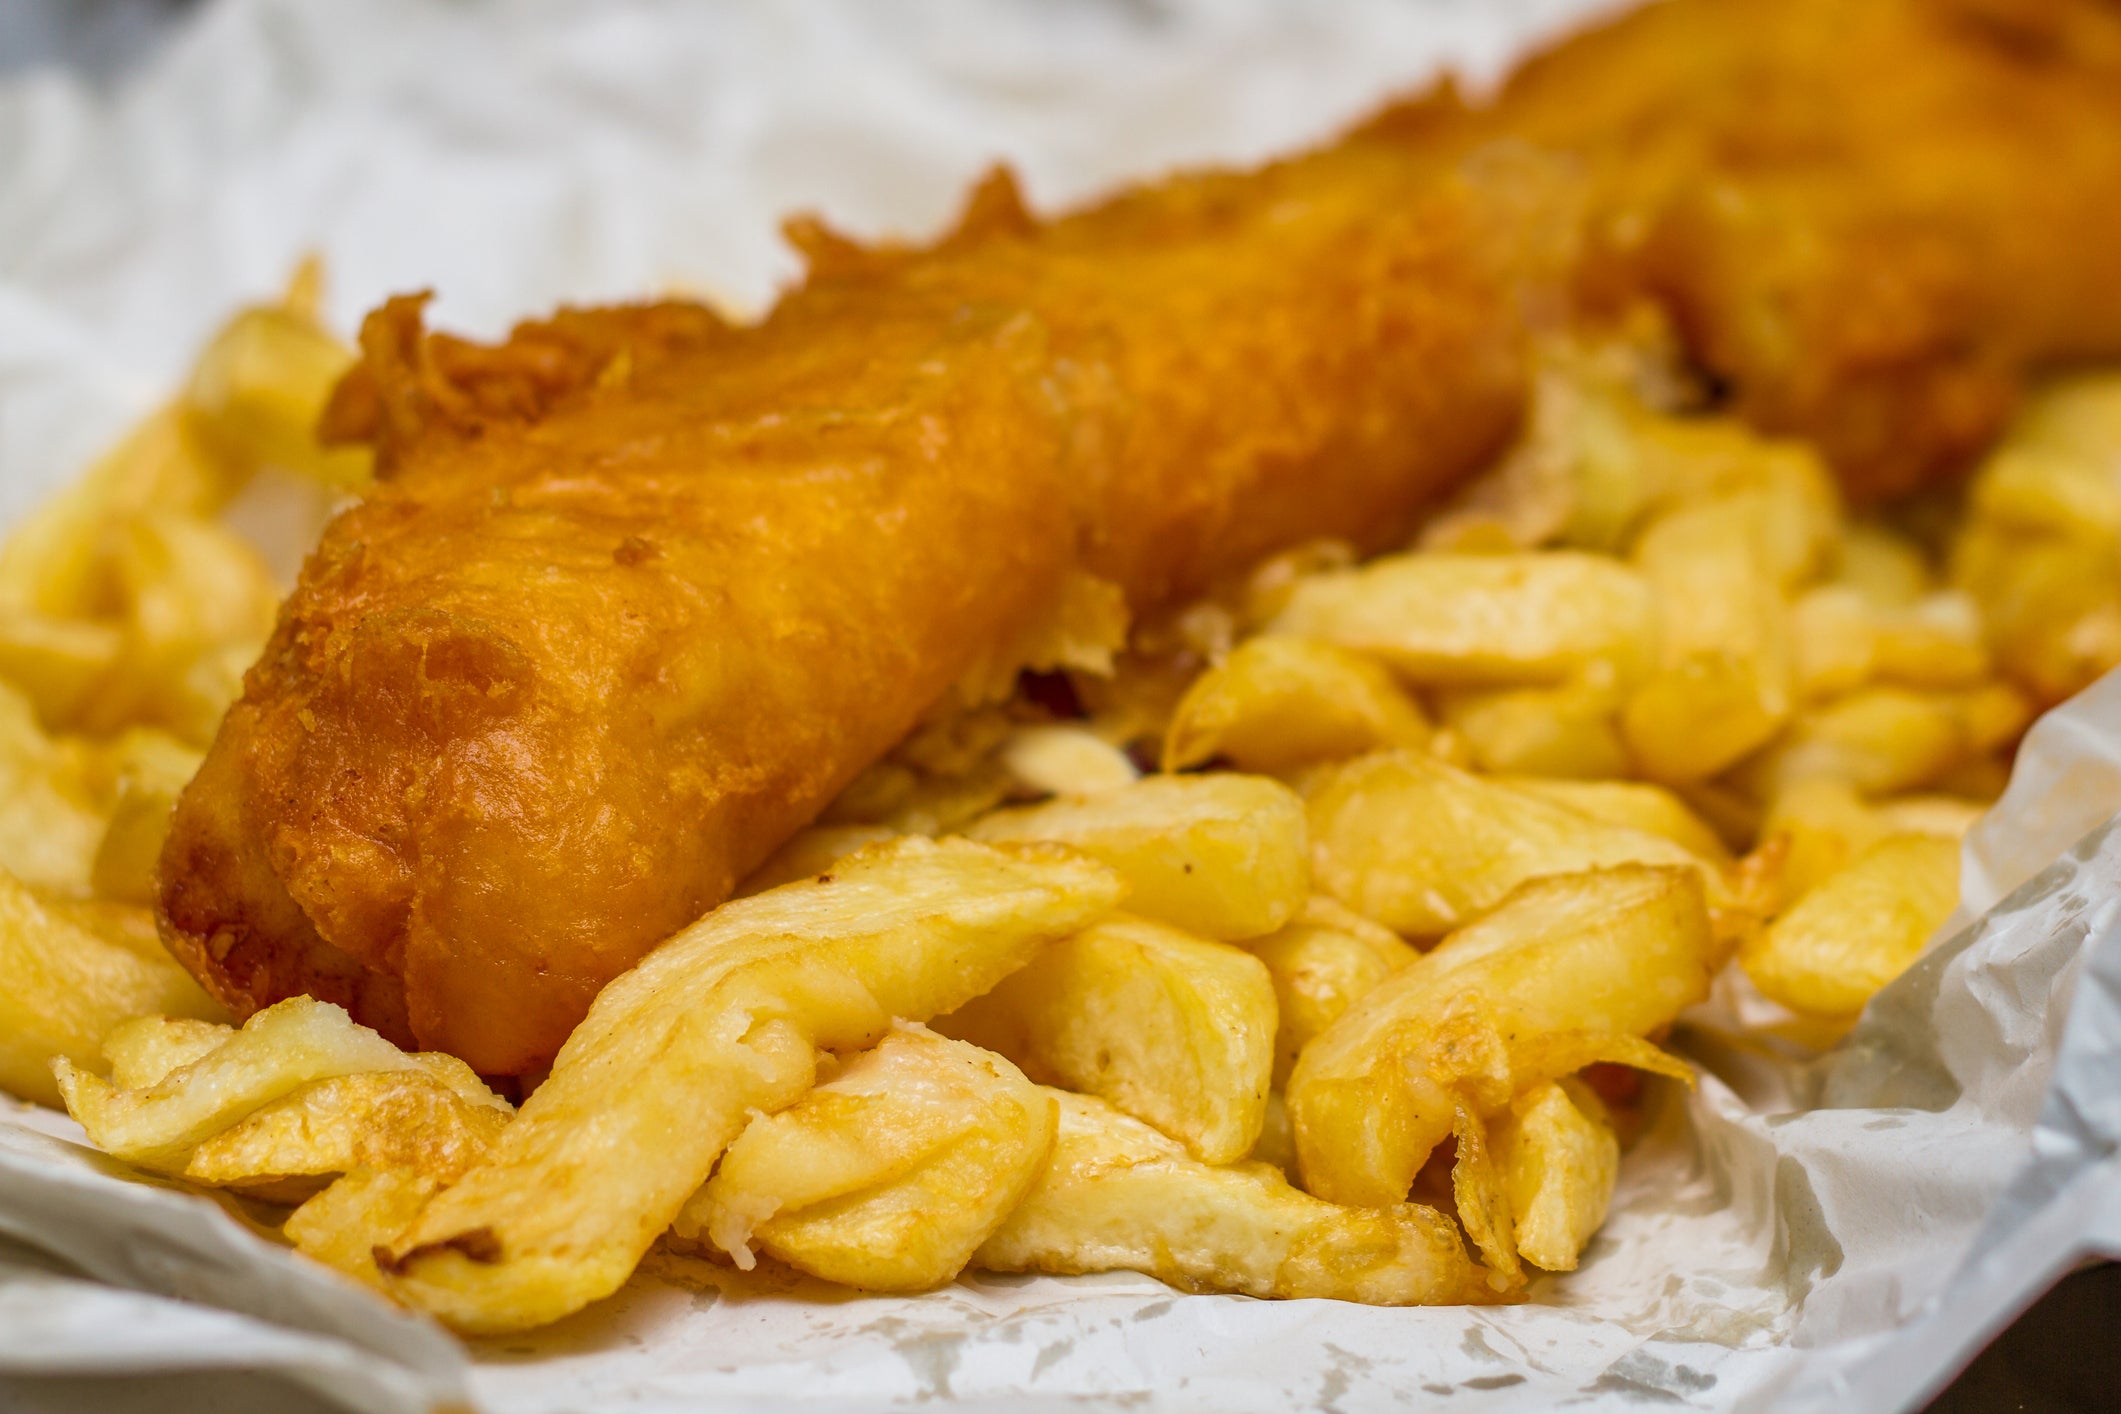 Trade organisations fear up to half of the UK’s chip shops could close